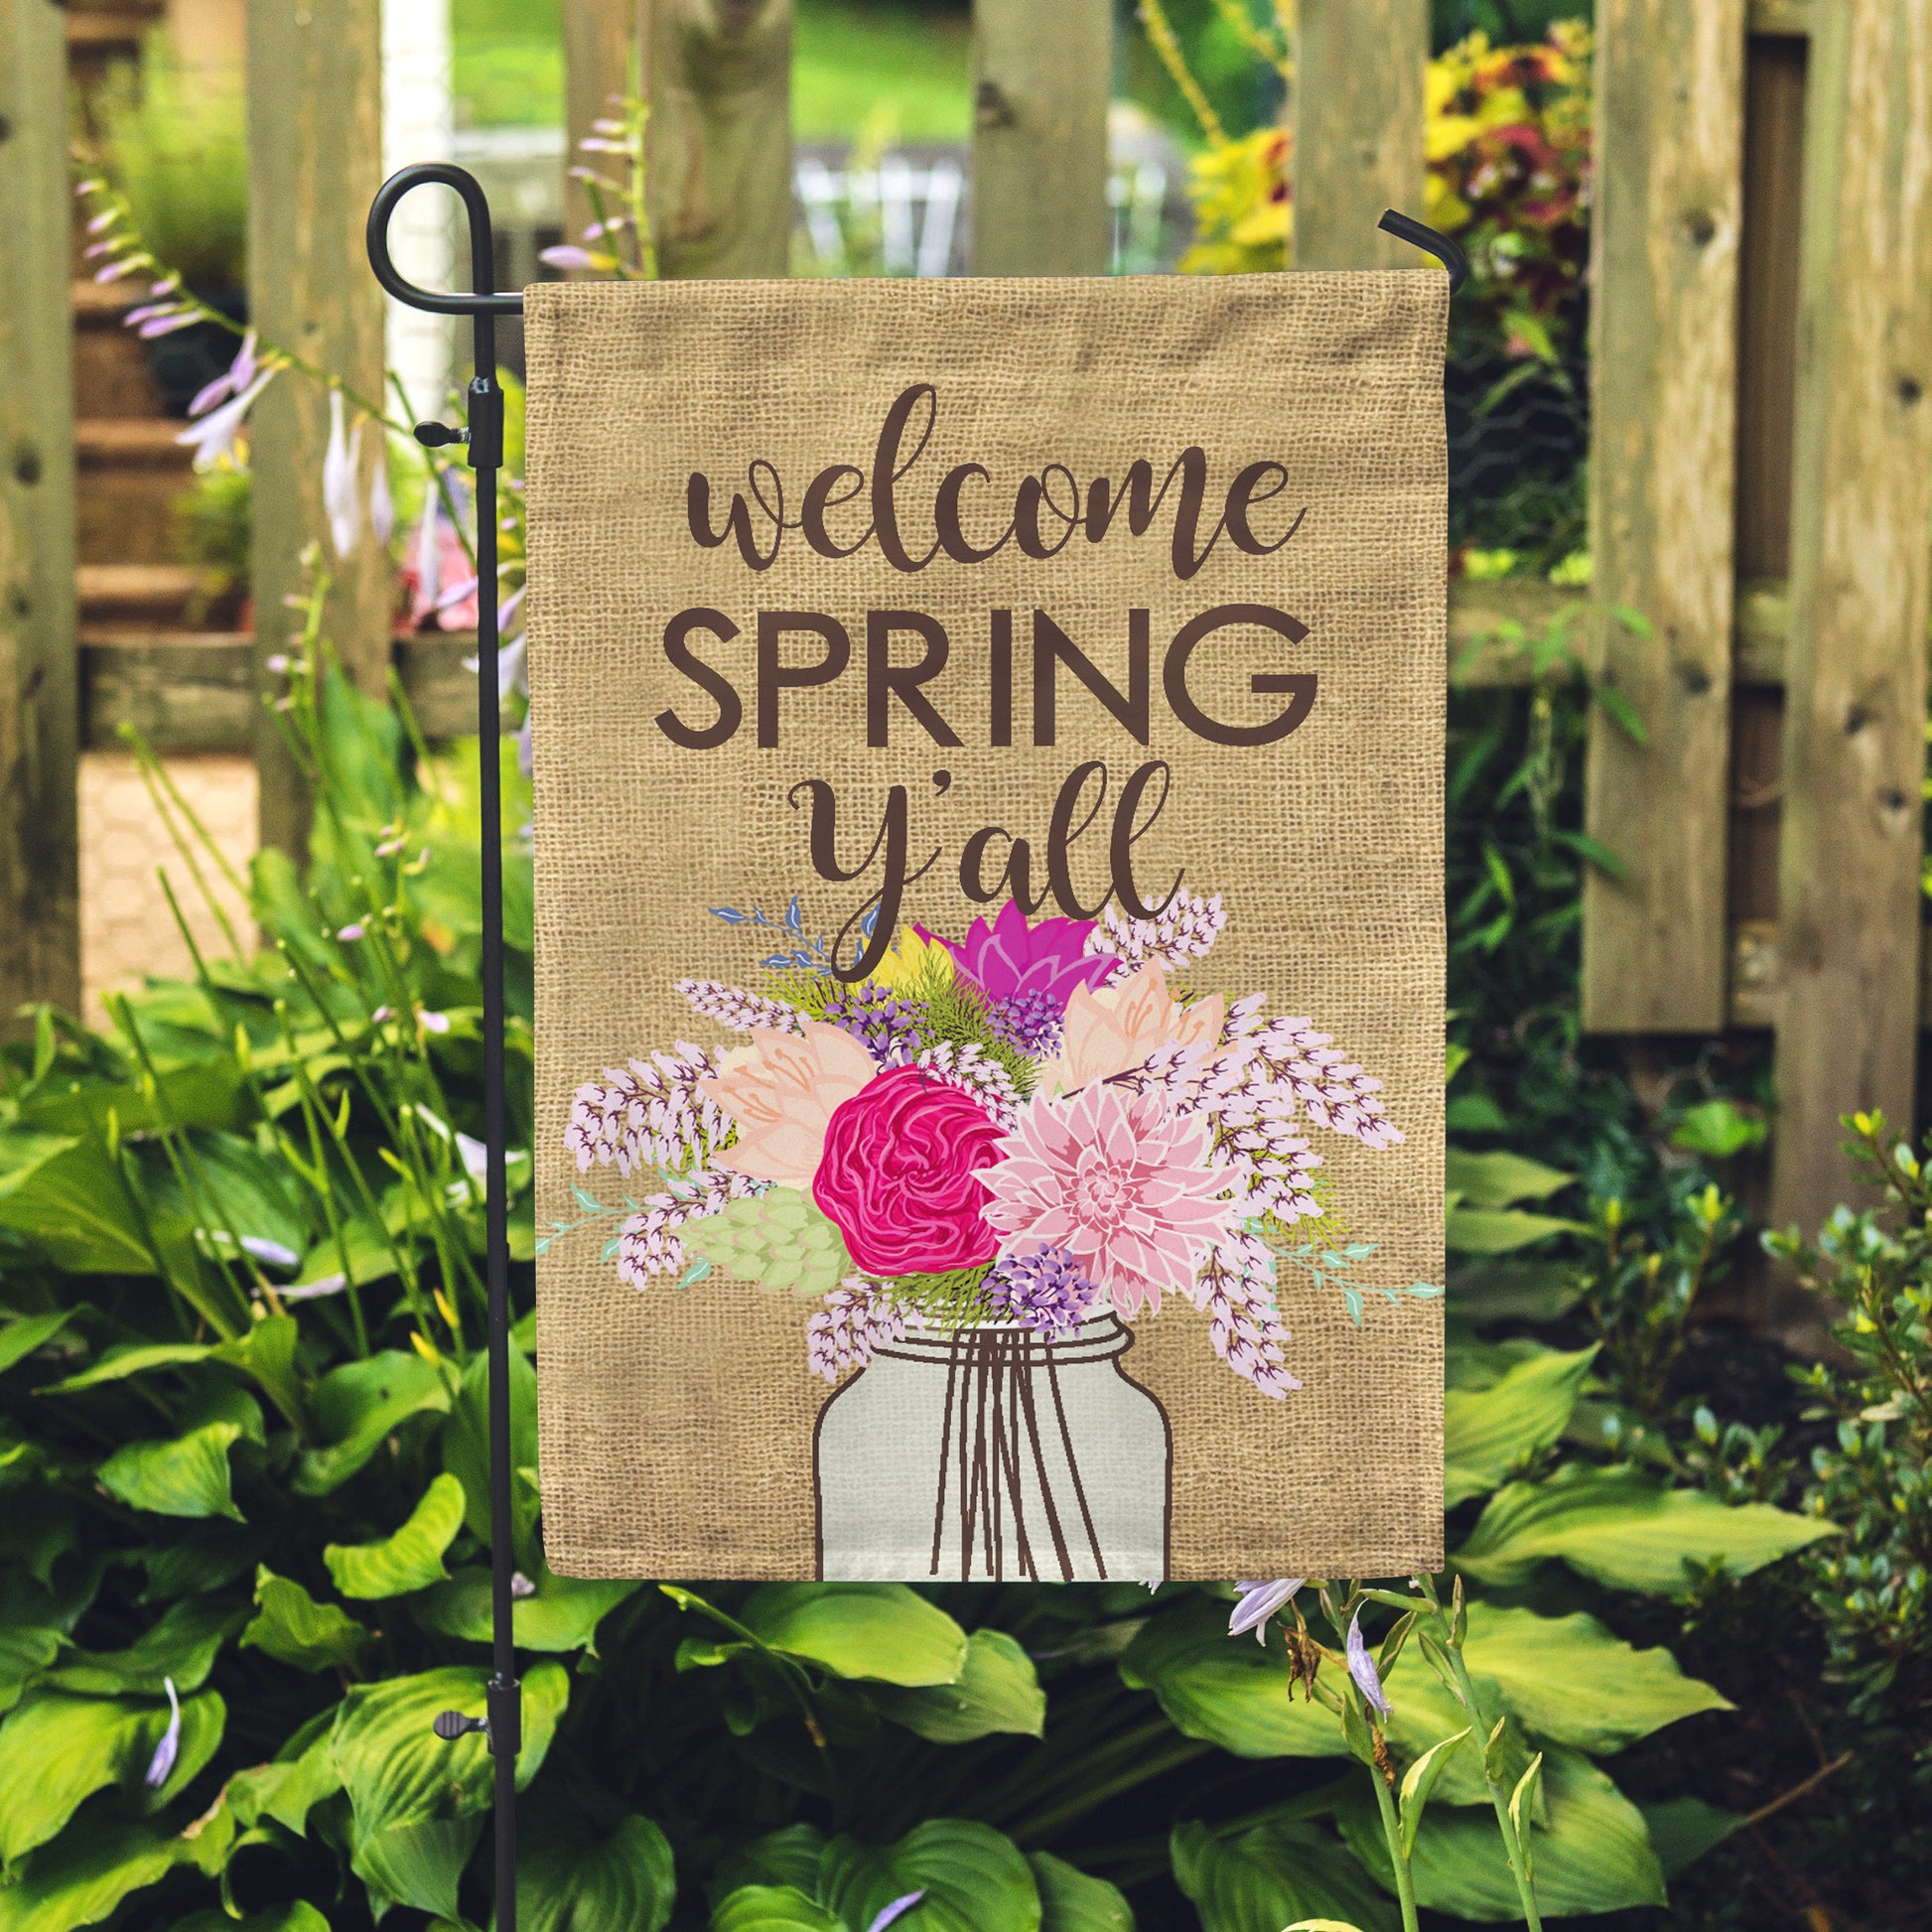 Welcome Spring Y'all Garden Flag - Second East